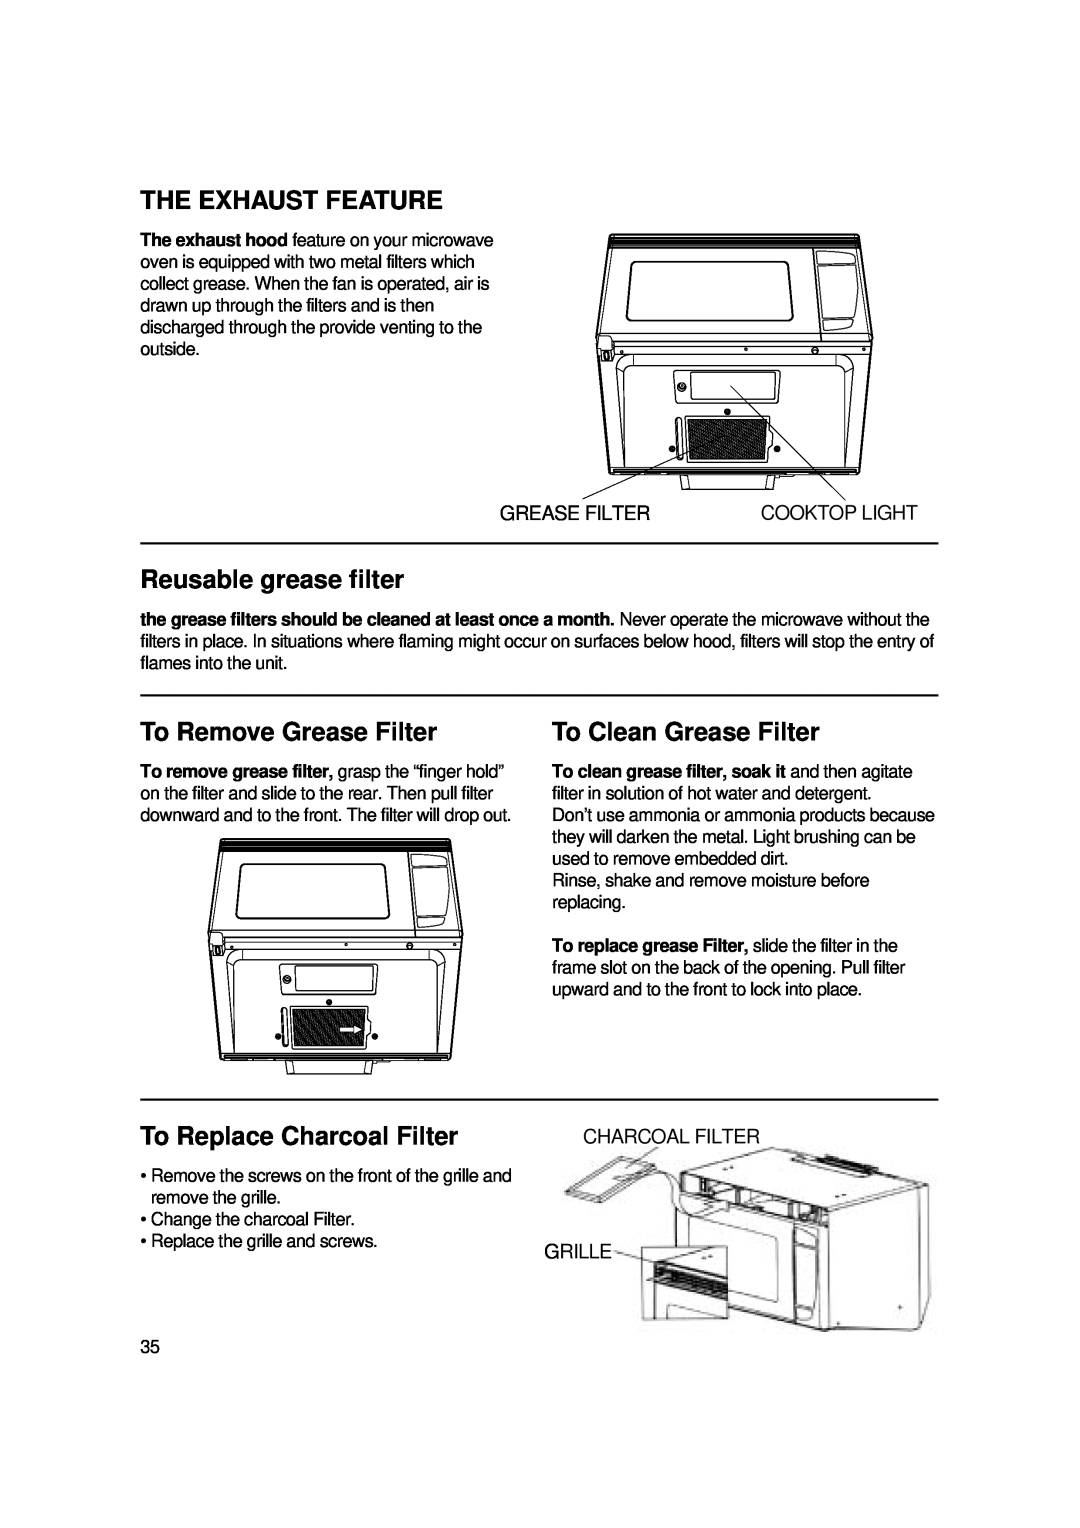 Magic Chef MCO2212ARW manual The Exhaust Feature, Reusable grease filter, To Remove Grease Filter, To Clean Grease Filter 